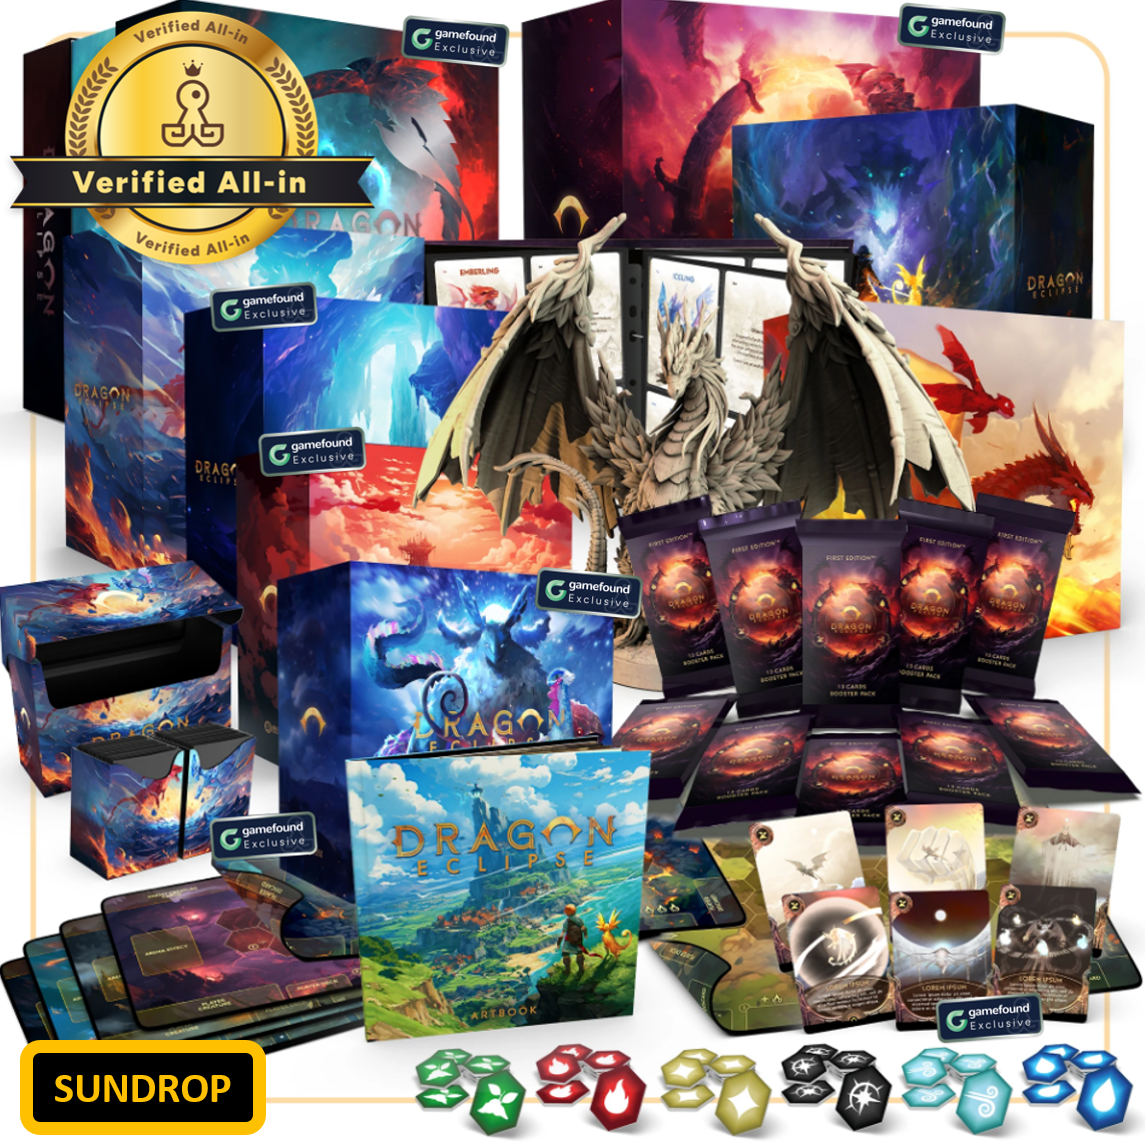 Gamefound Exclusive Dragon Eclipse Board Game Verified Dragon Guardian All-In, Sundrop Edition